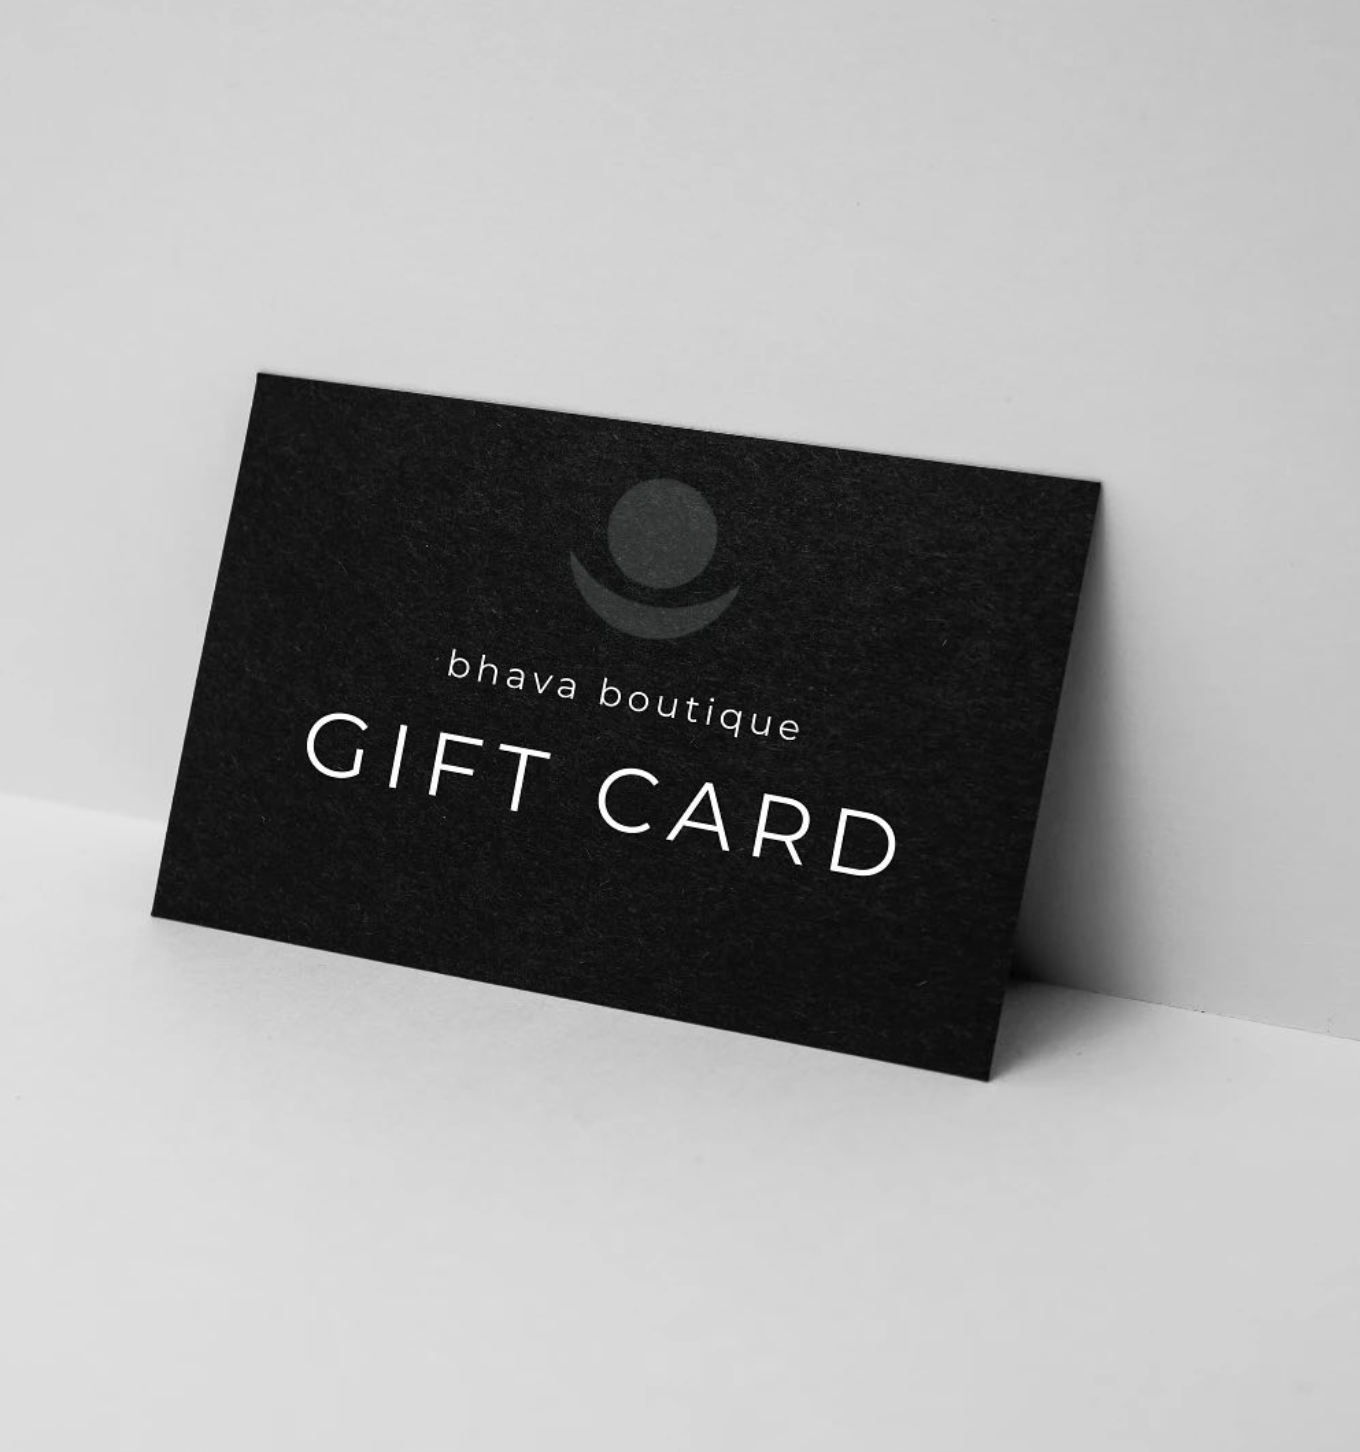 Bhava Boutique Gift Card